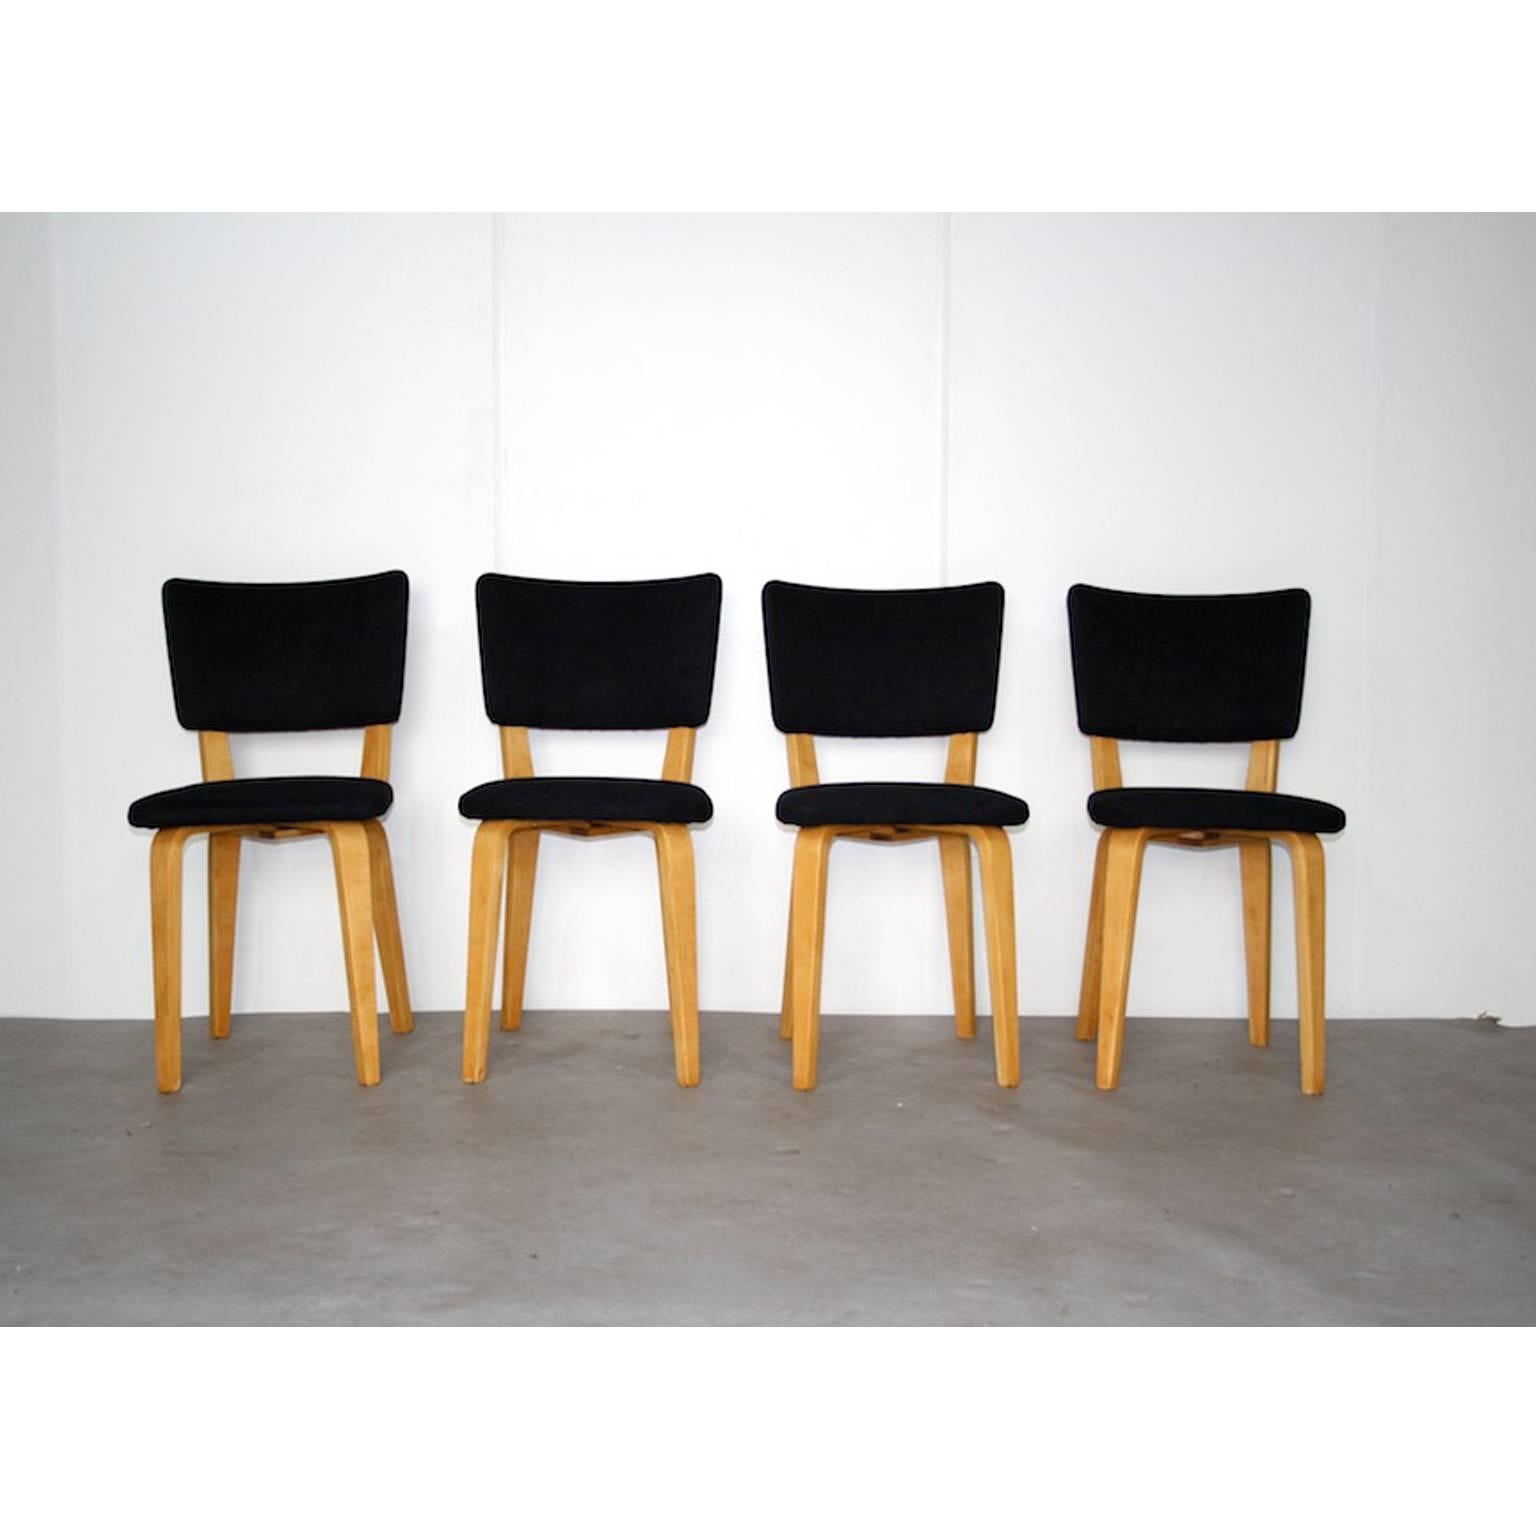 Birchwood plywood chairs with new black upholstery. Designed by Cor Alons for Gouda den Boer in Holland. These chairs have a very nice construction, they exsist of four plywood bars which are attached crosswise and holding the seating and the